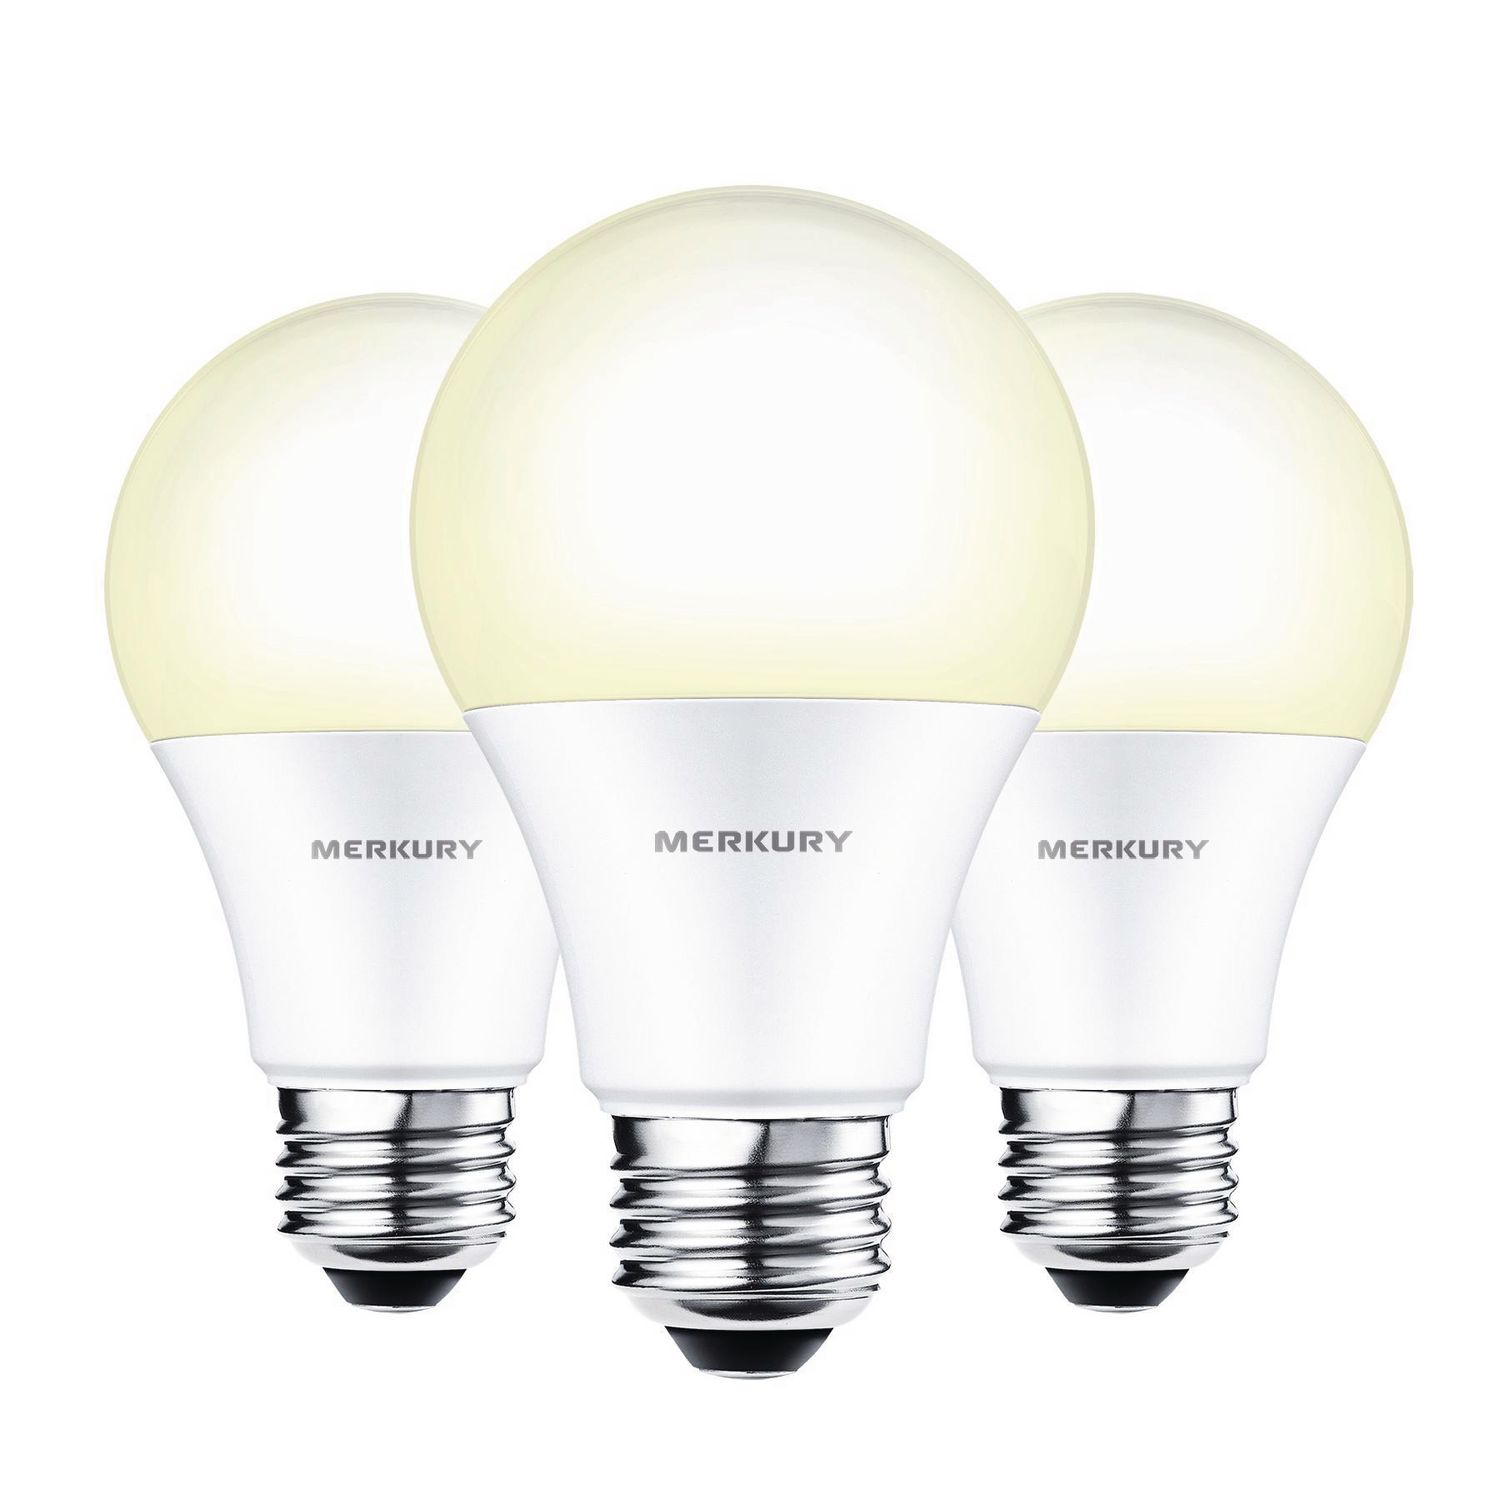 Smart Life Bulbs Blinking The Negative Is If You Lose Complaints That